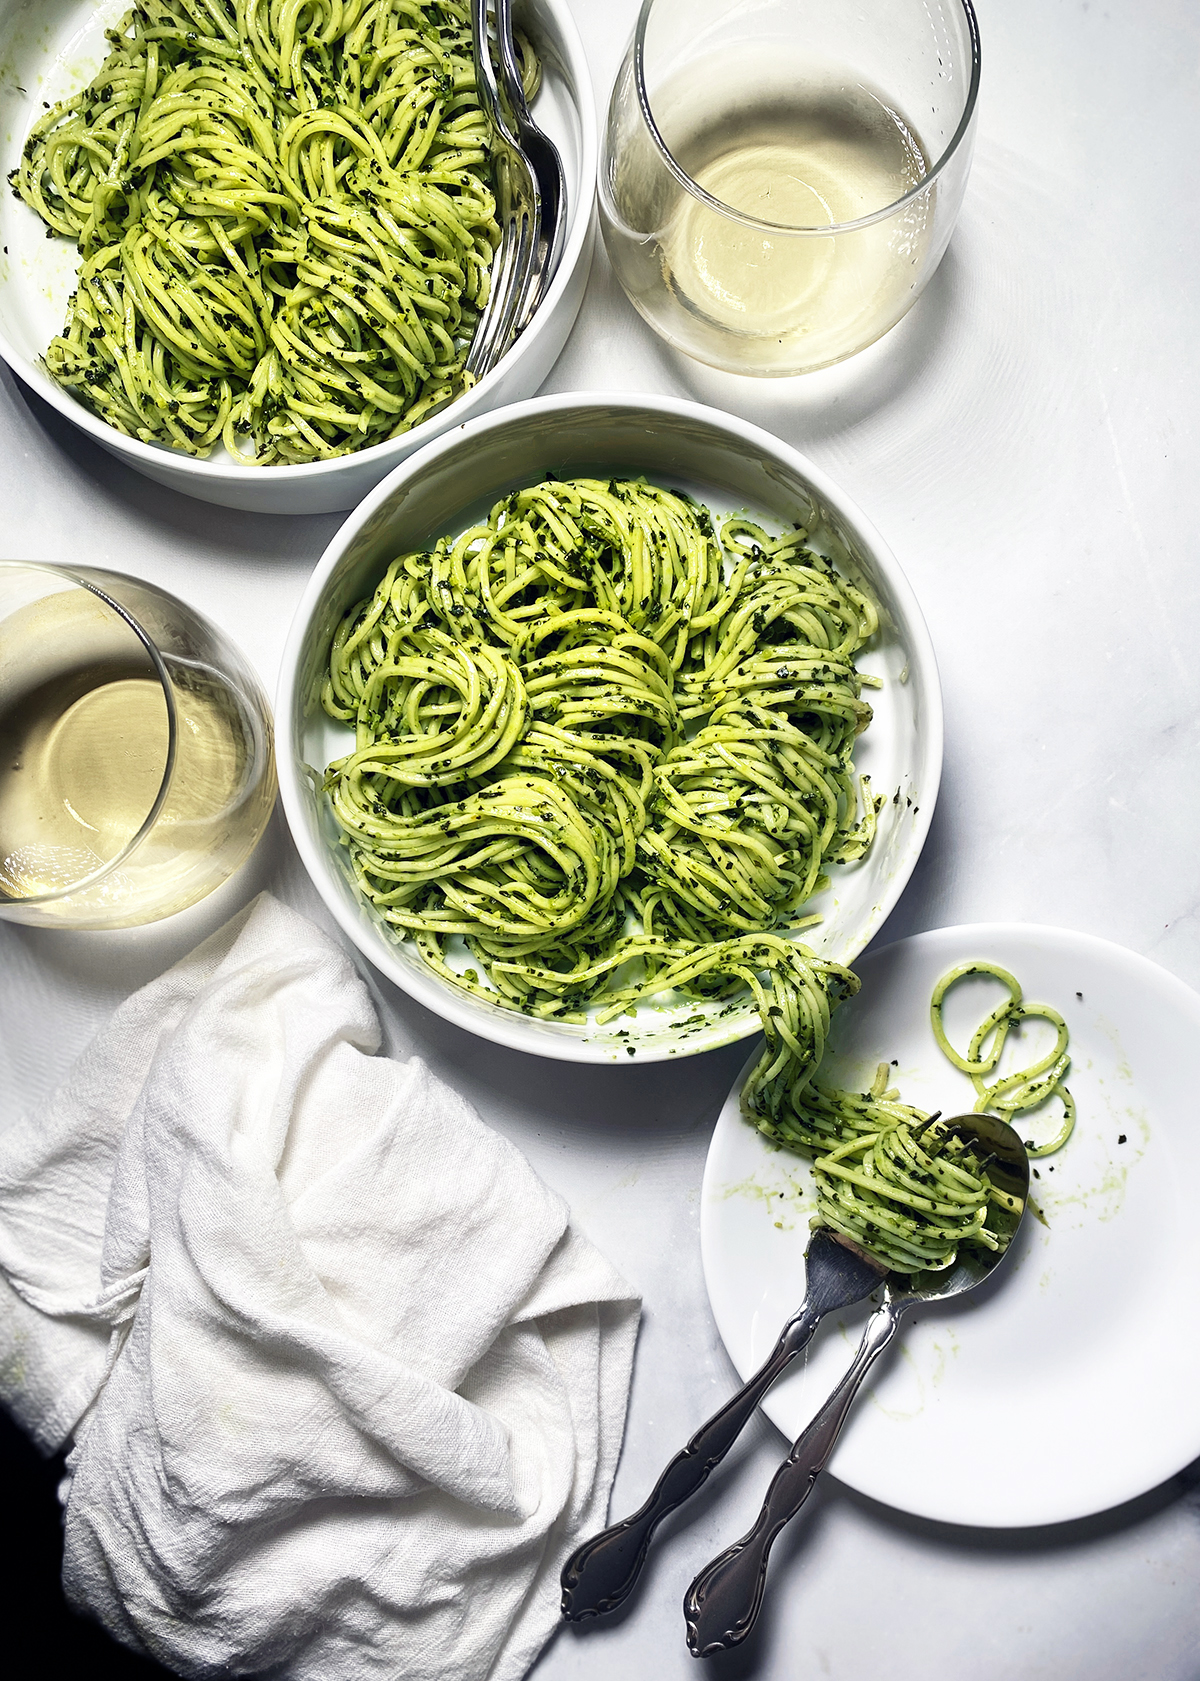 kale pesto pasta in white bowls and white wine in glasses on white tabletop